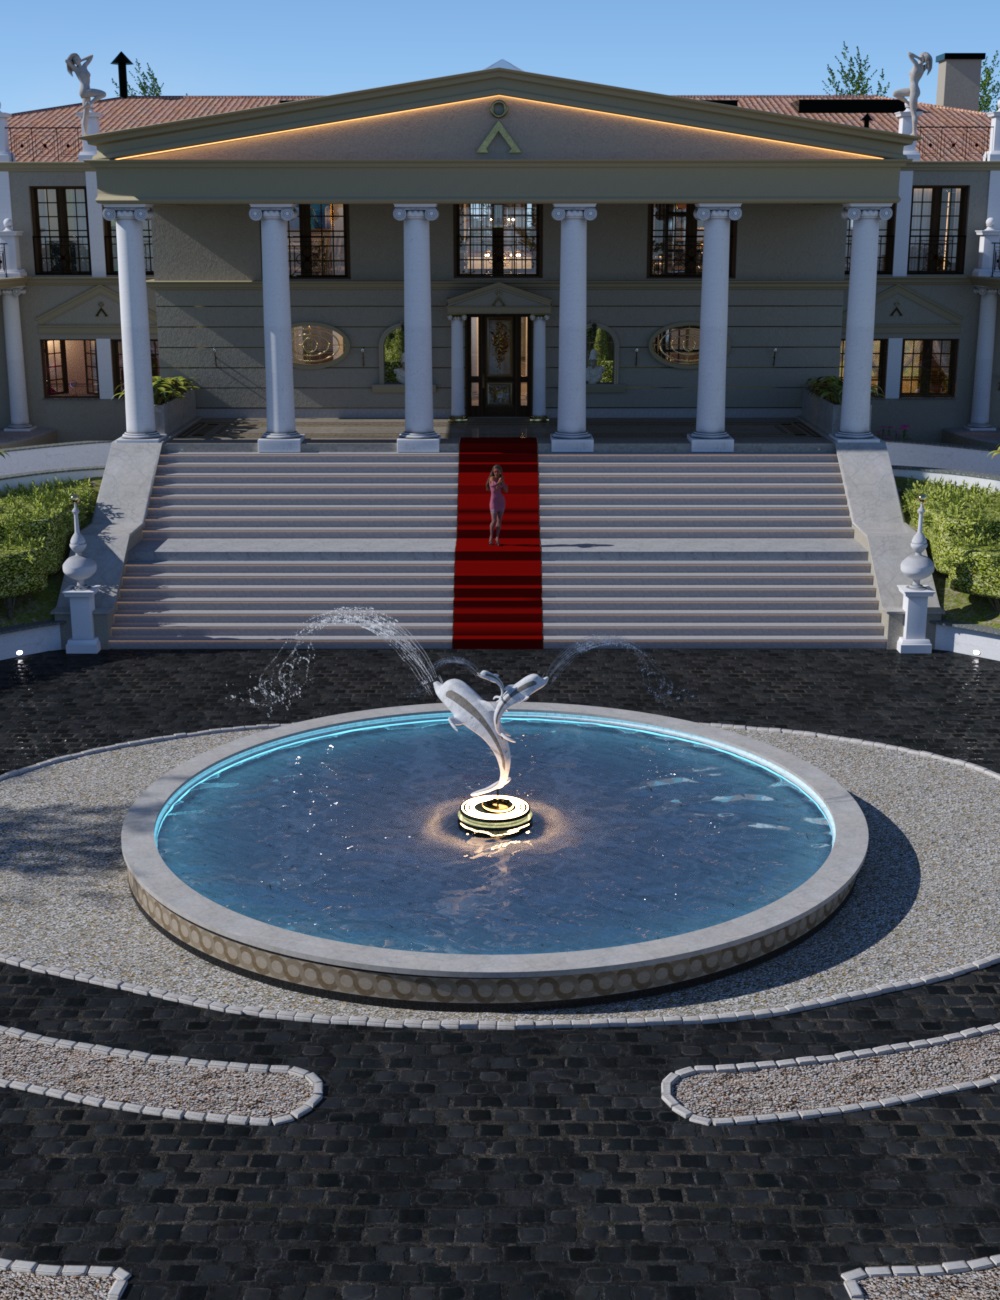 PW The White Palace by: PW Productions, 3D Models by Daz 3D